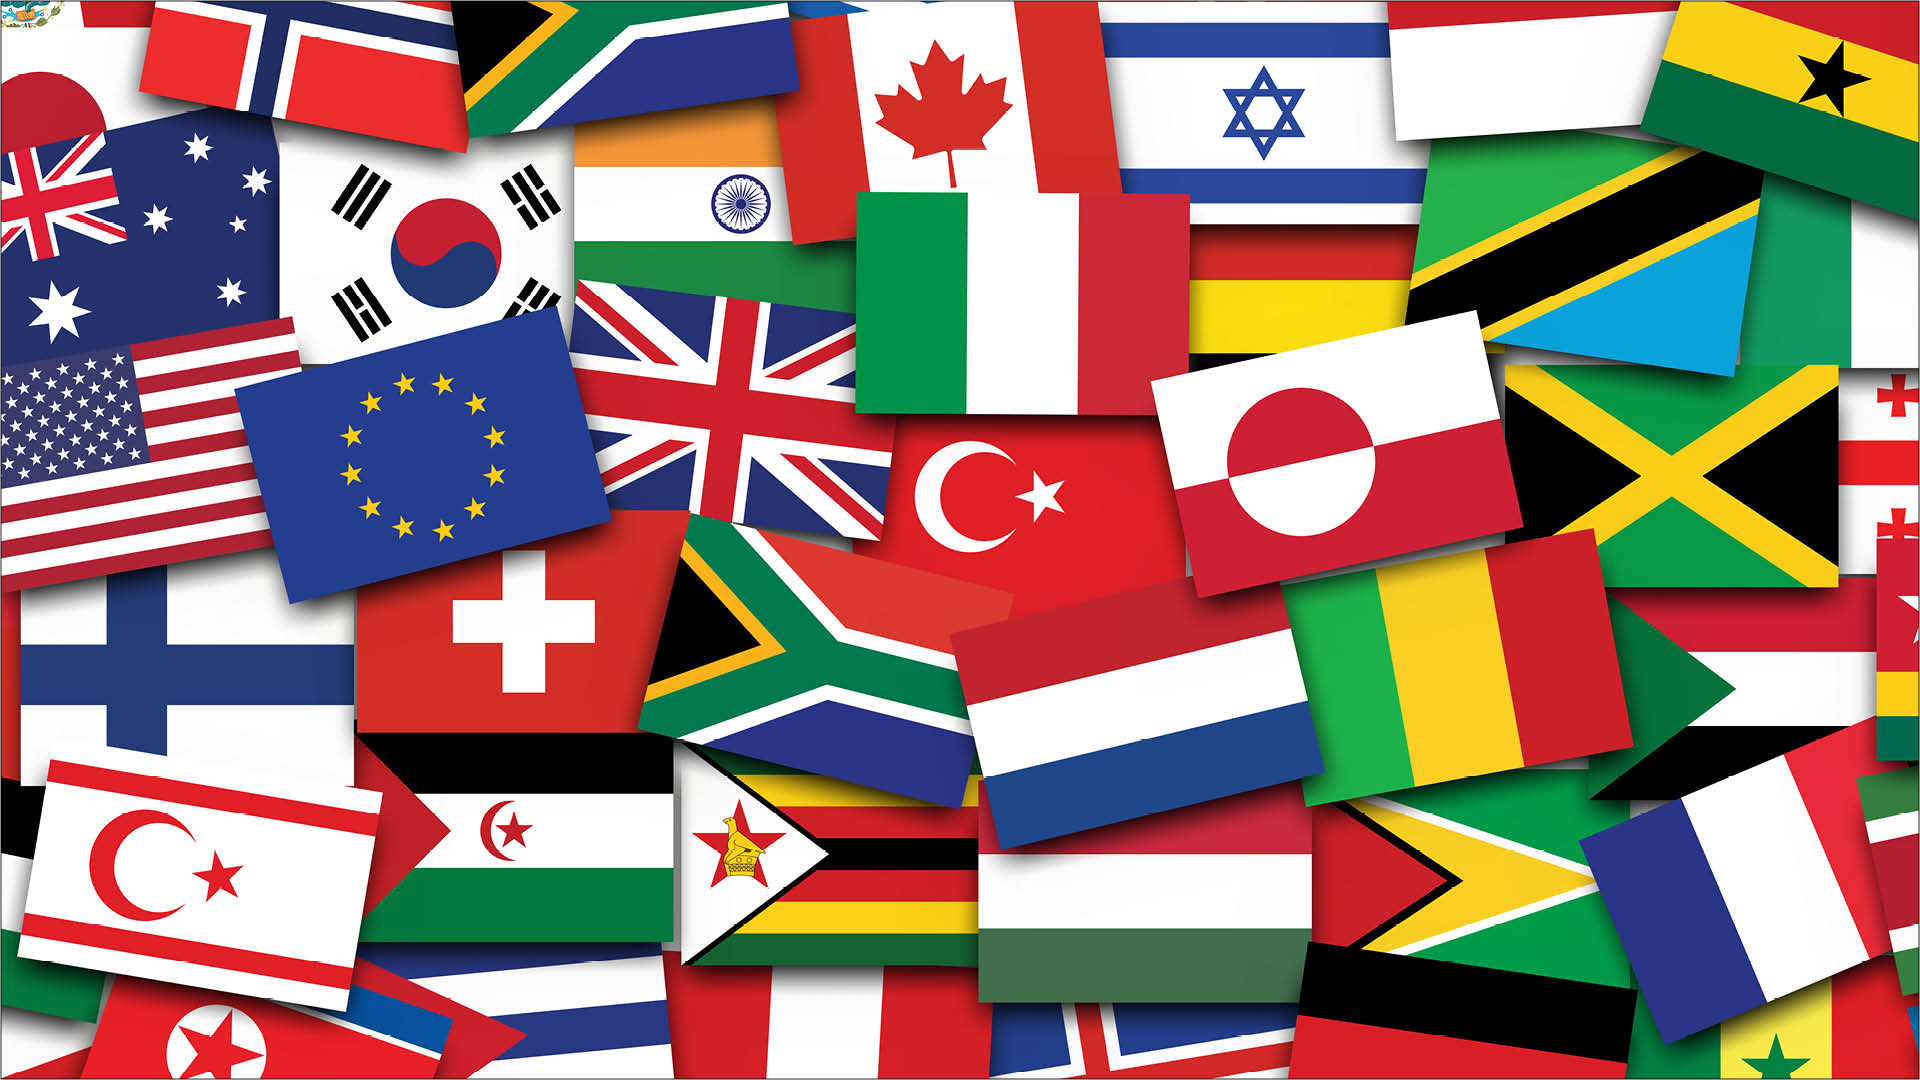 Collage of flags of various countries